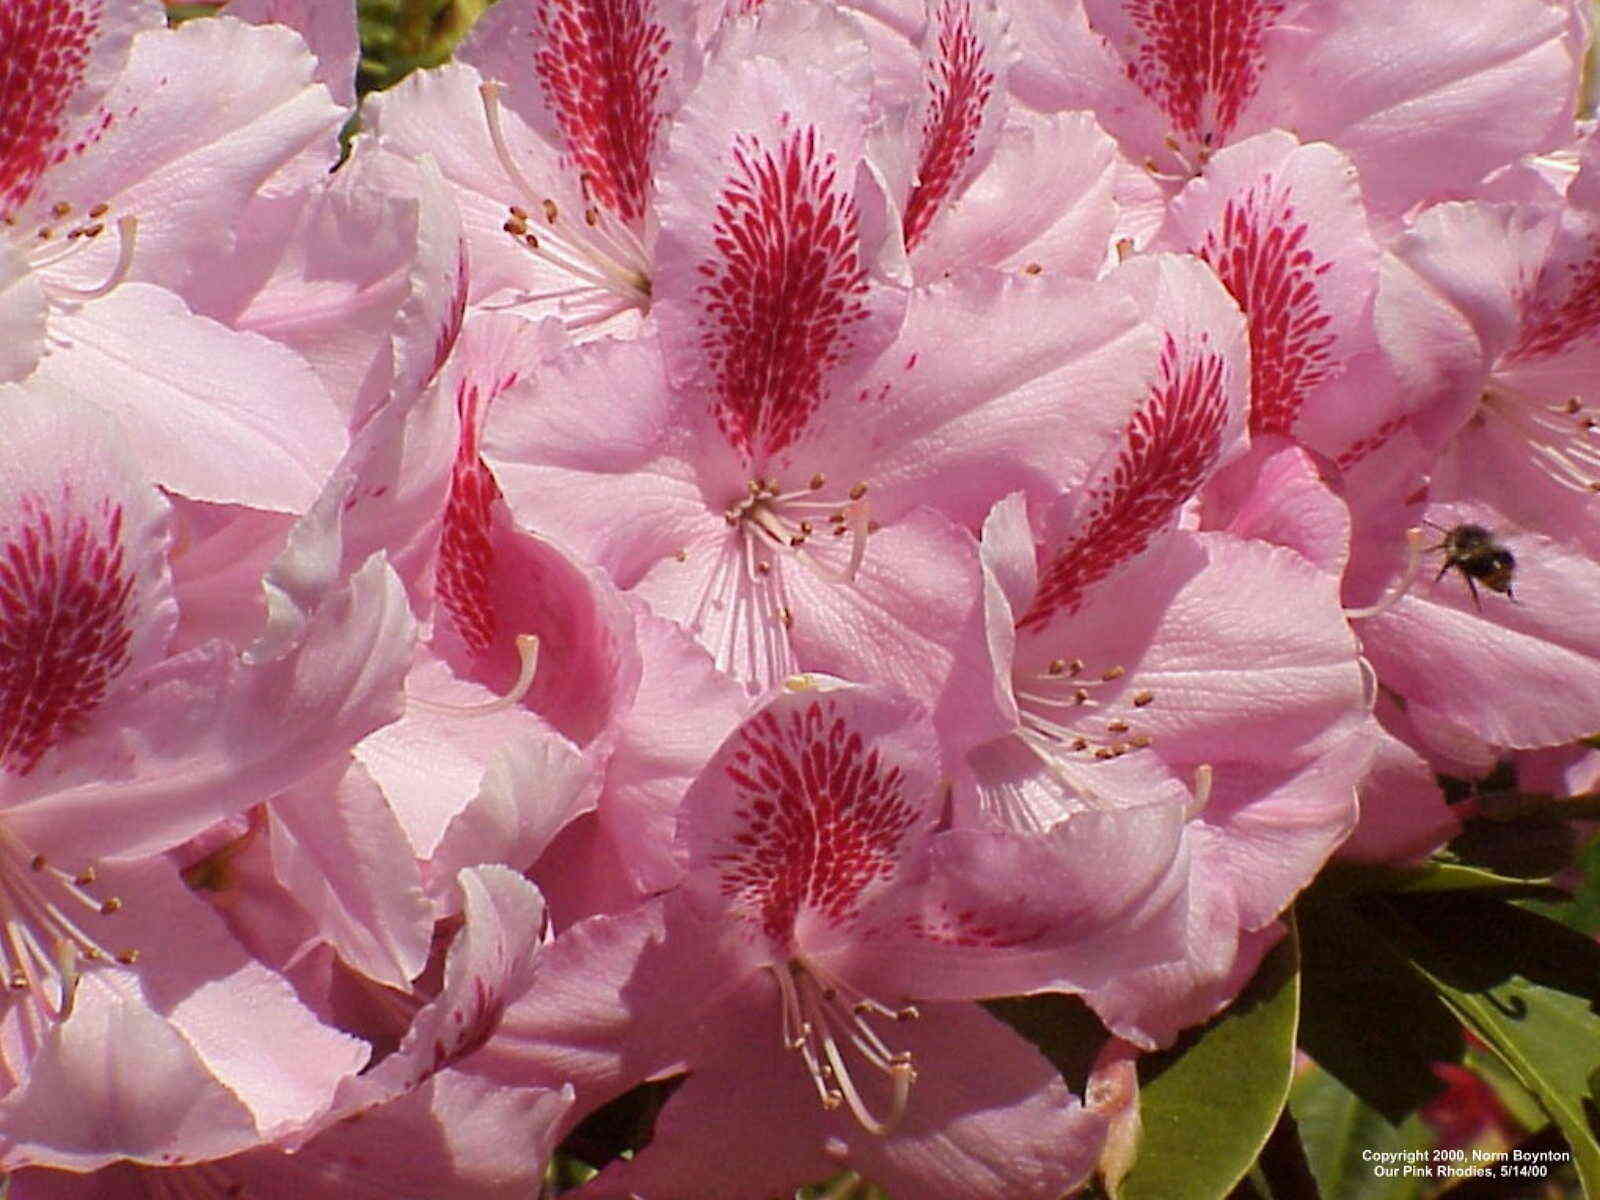 Wallpaper Photo - "Our Pink Rhodies" - 1600 x 1200